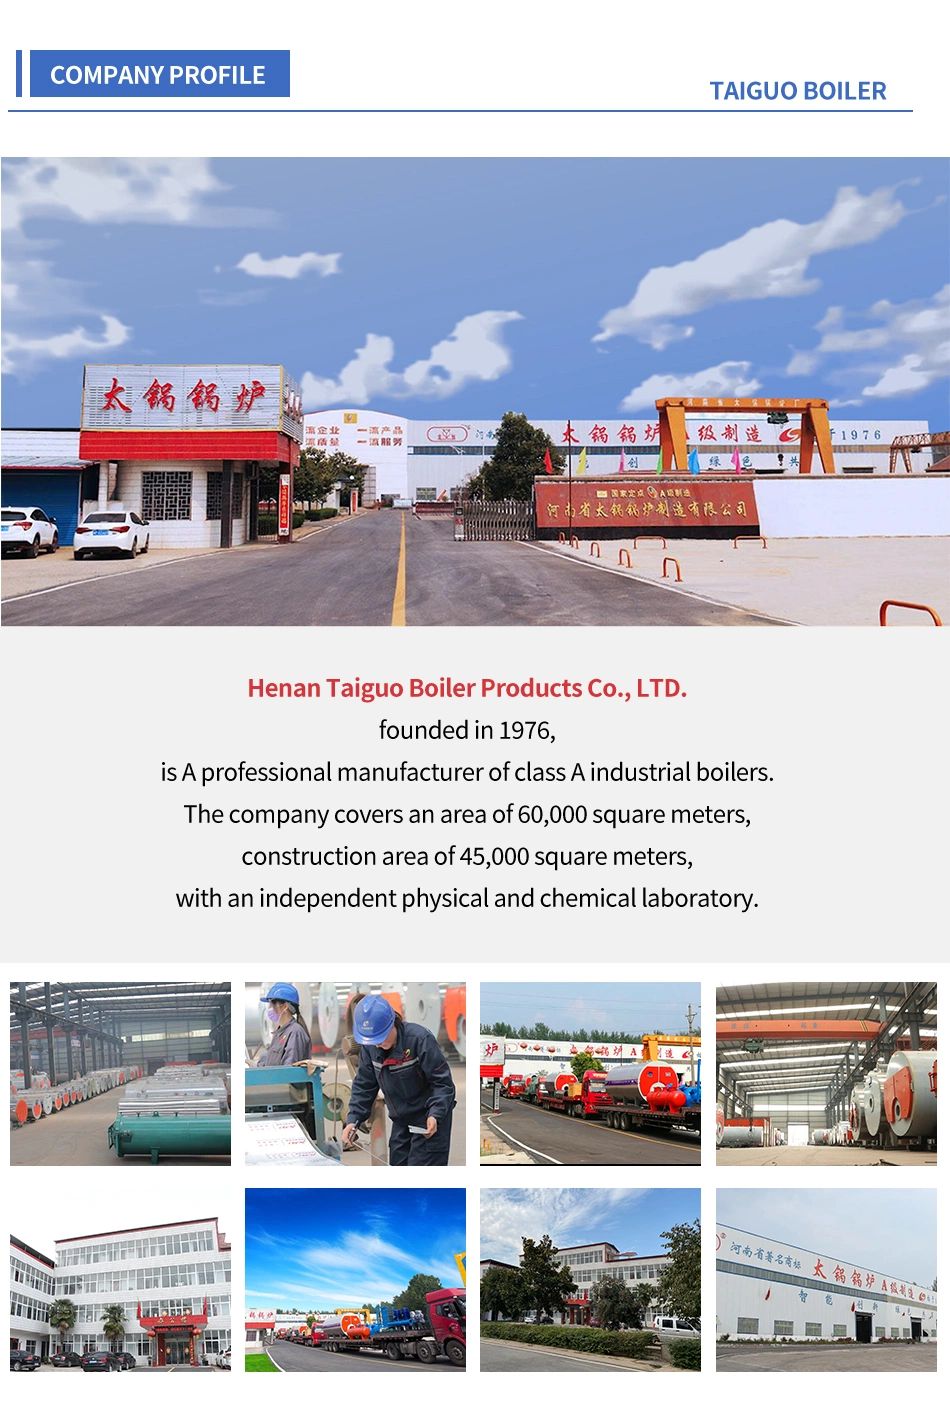 Traveling Grate Stoker Automatic Steam Coal or Rice Husk Boiler Price